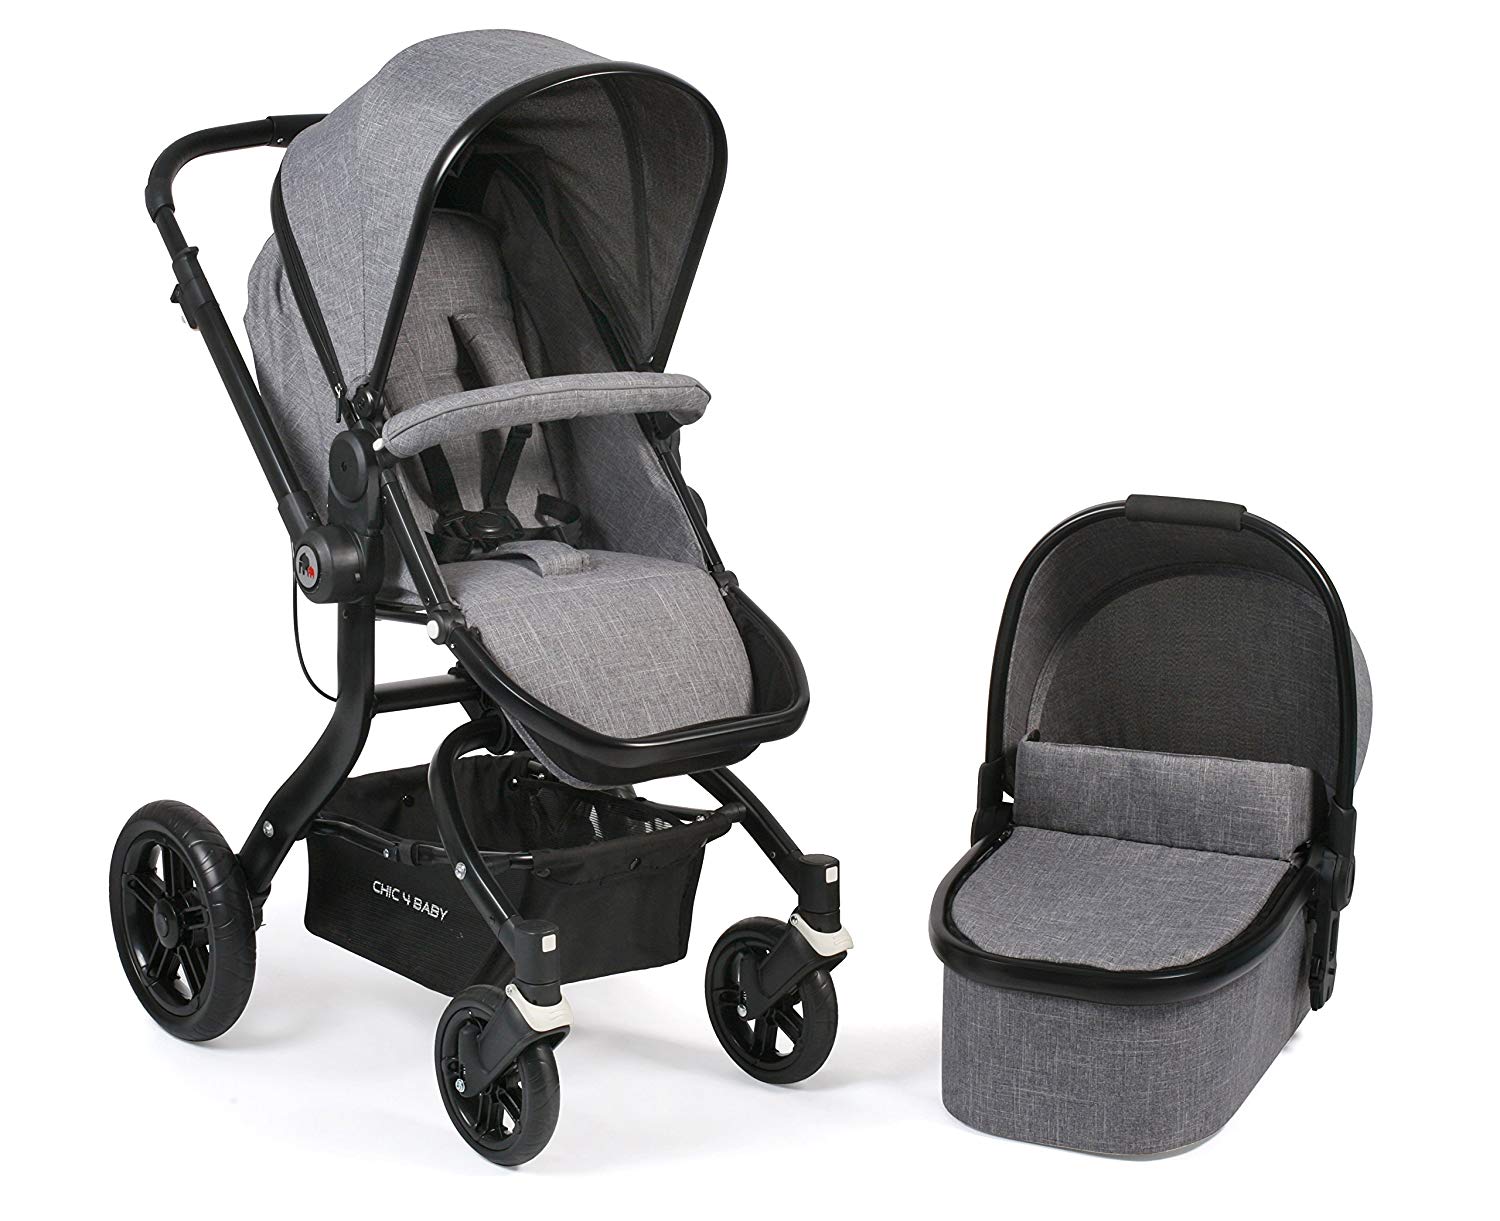 CHIC 4 BABY Tano 173 32 Combi Pushchair Jeans Grey